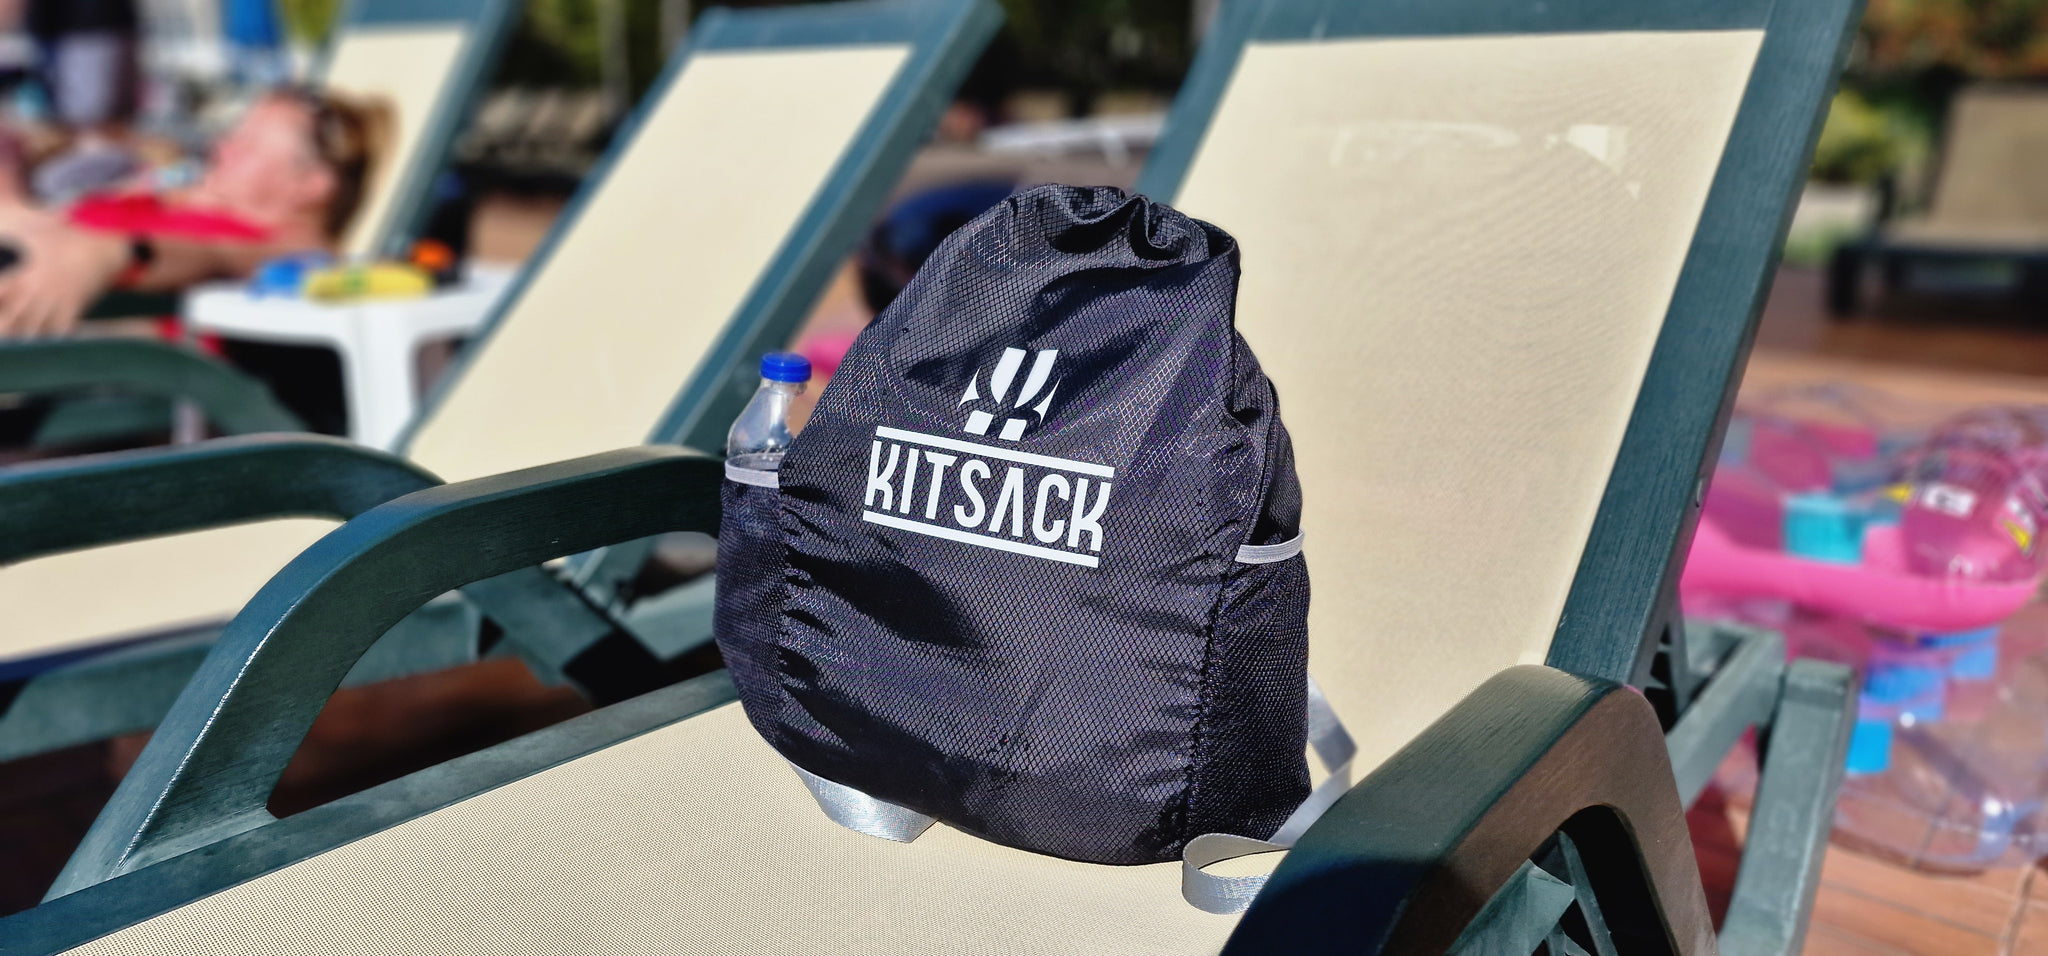 KITSACK Draw string gym bag, Ideal for school, by the pool or even at the beach